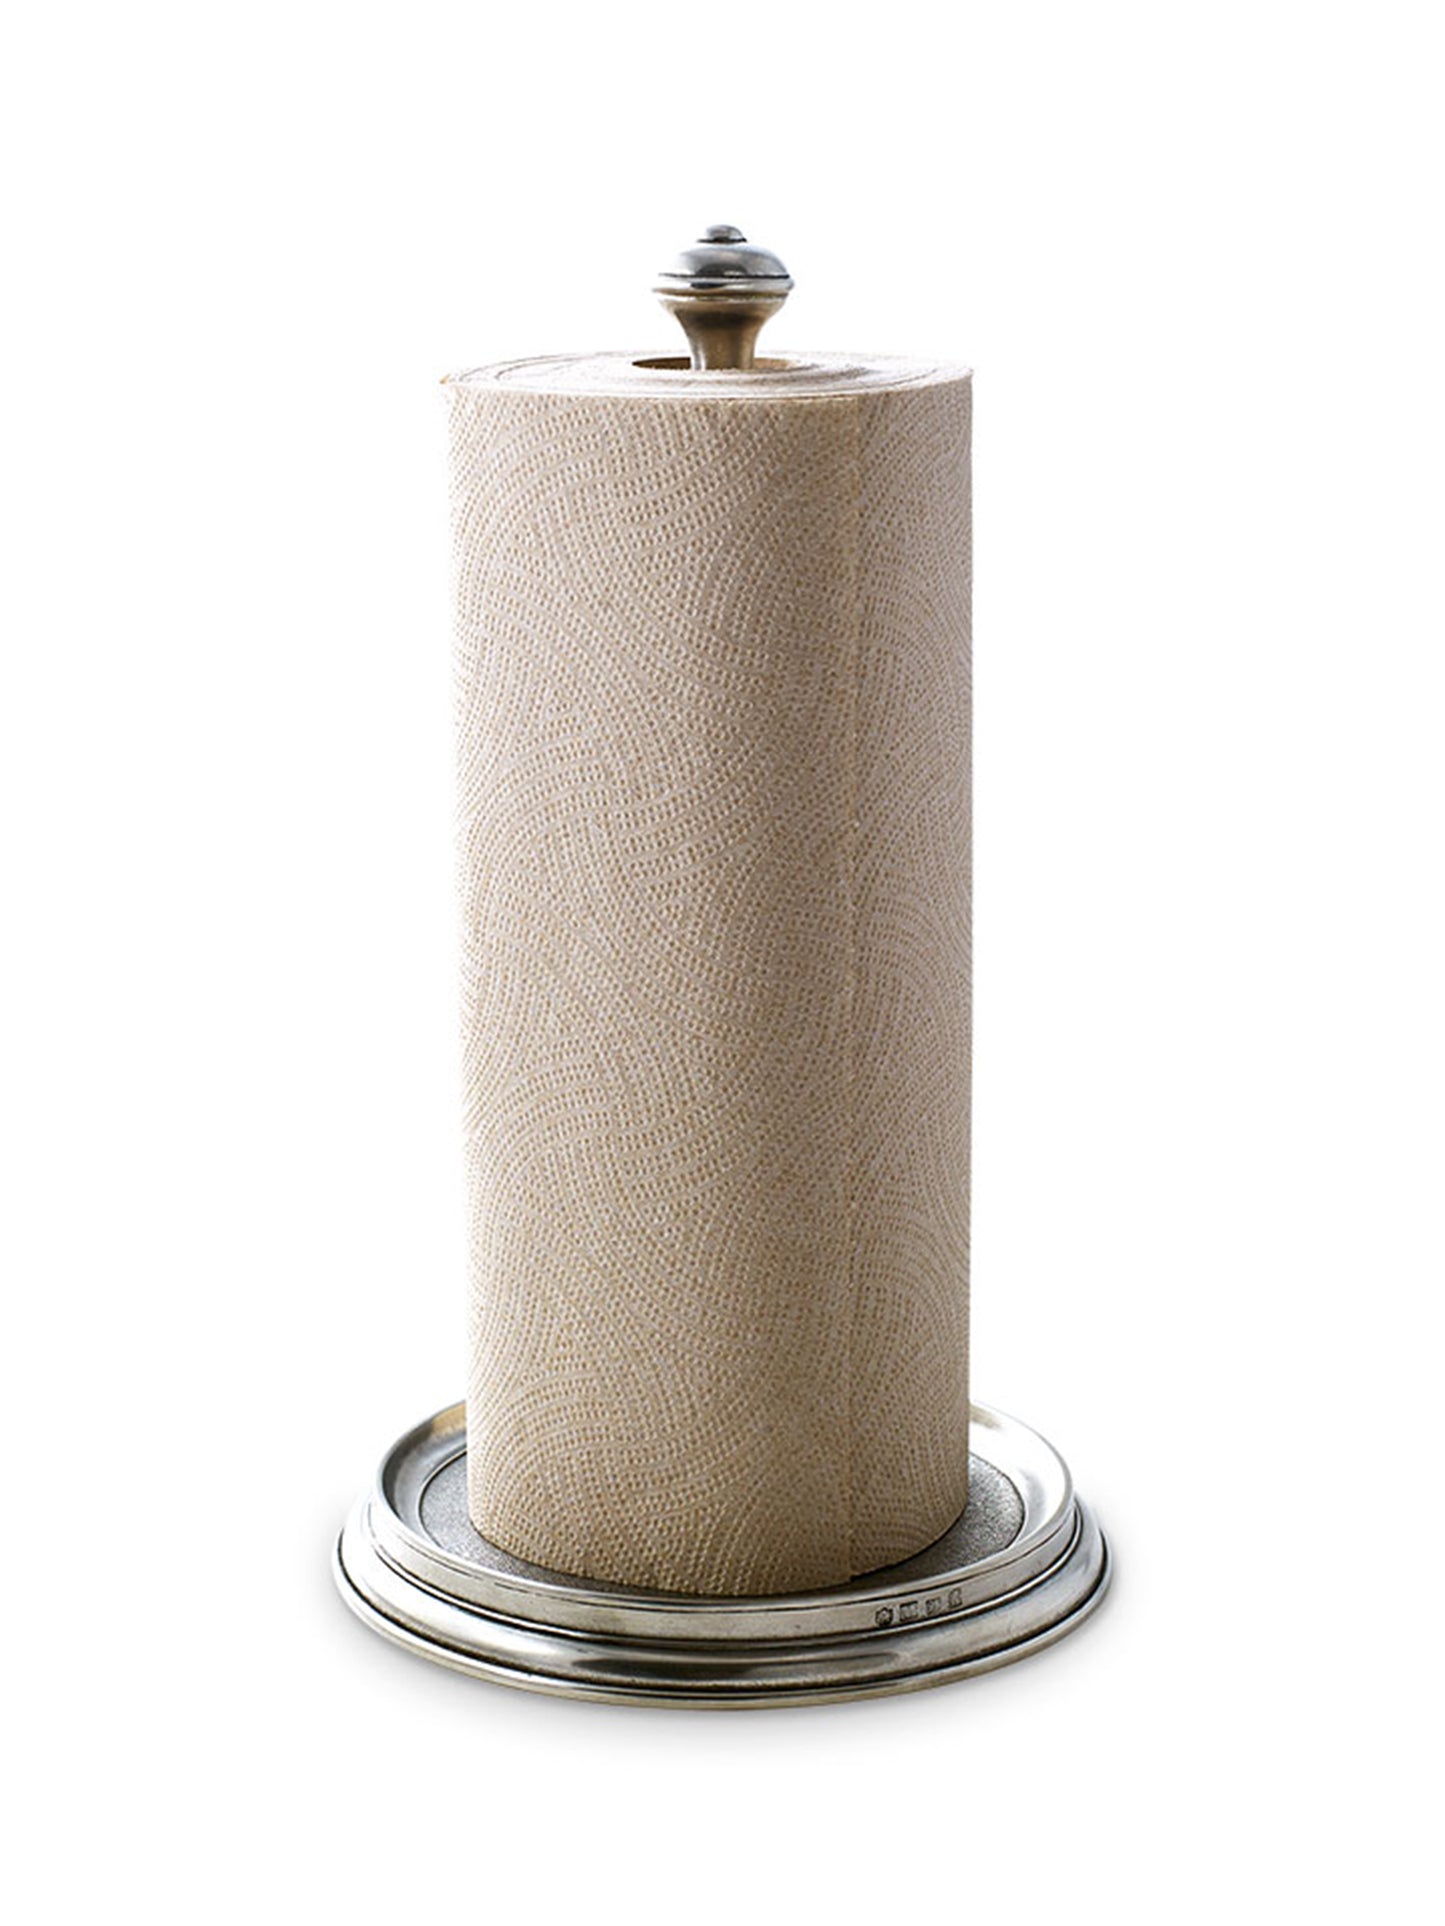 MATCH Pewter Paper Towel Holder Weston Table